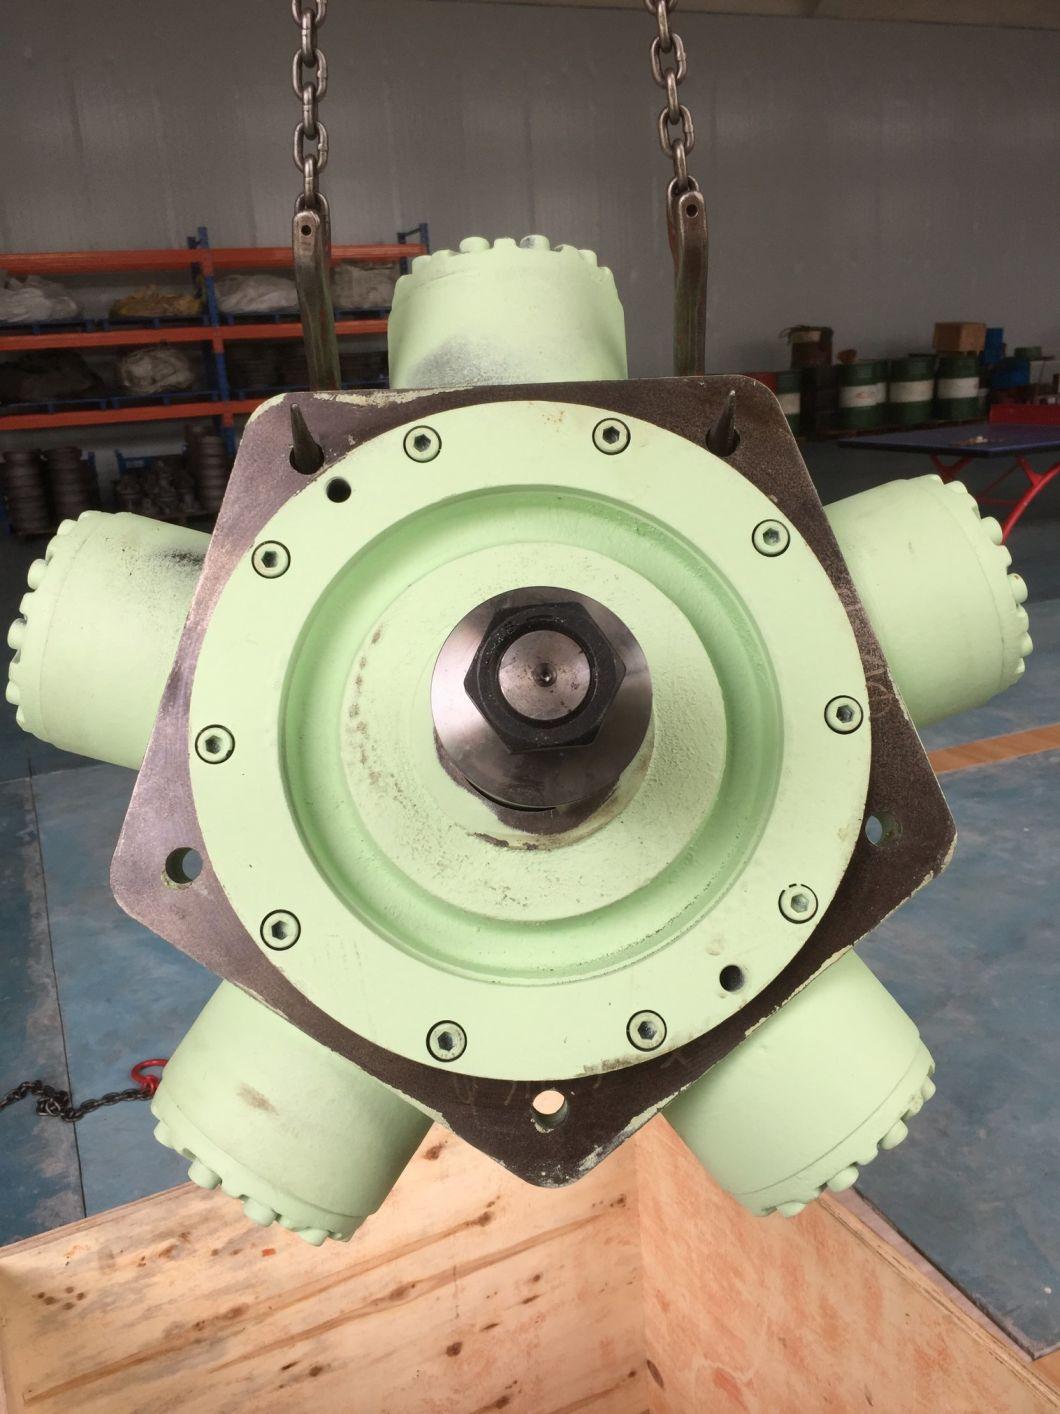 Heavy-Duty Staffa Radial Piston hydraulic Motor Winch Motor Supplied in China with Good Quality and Price.